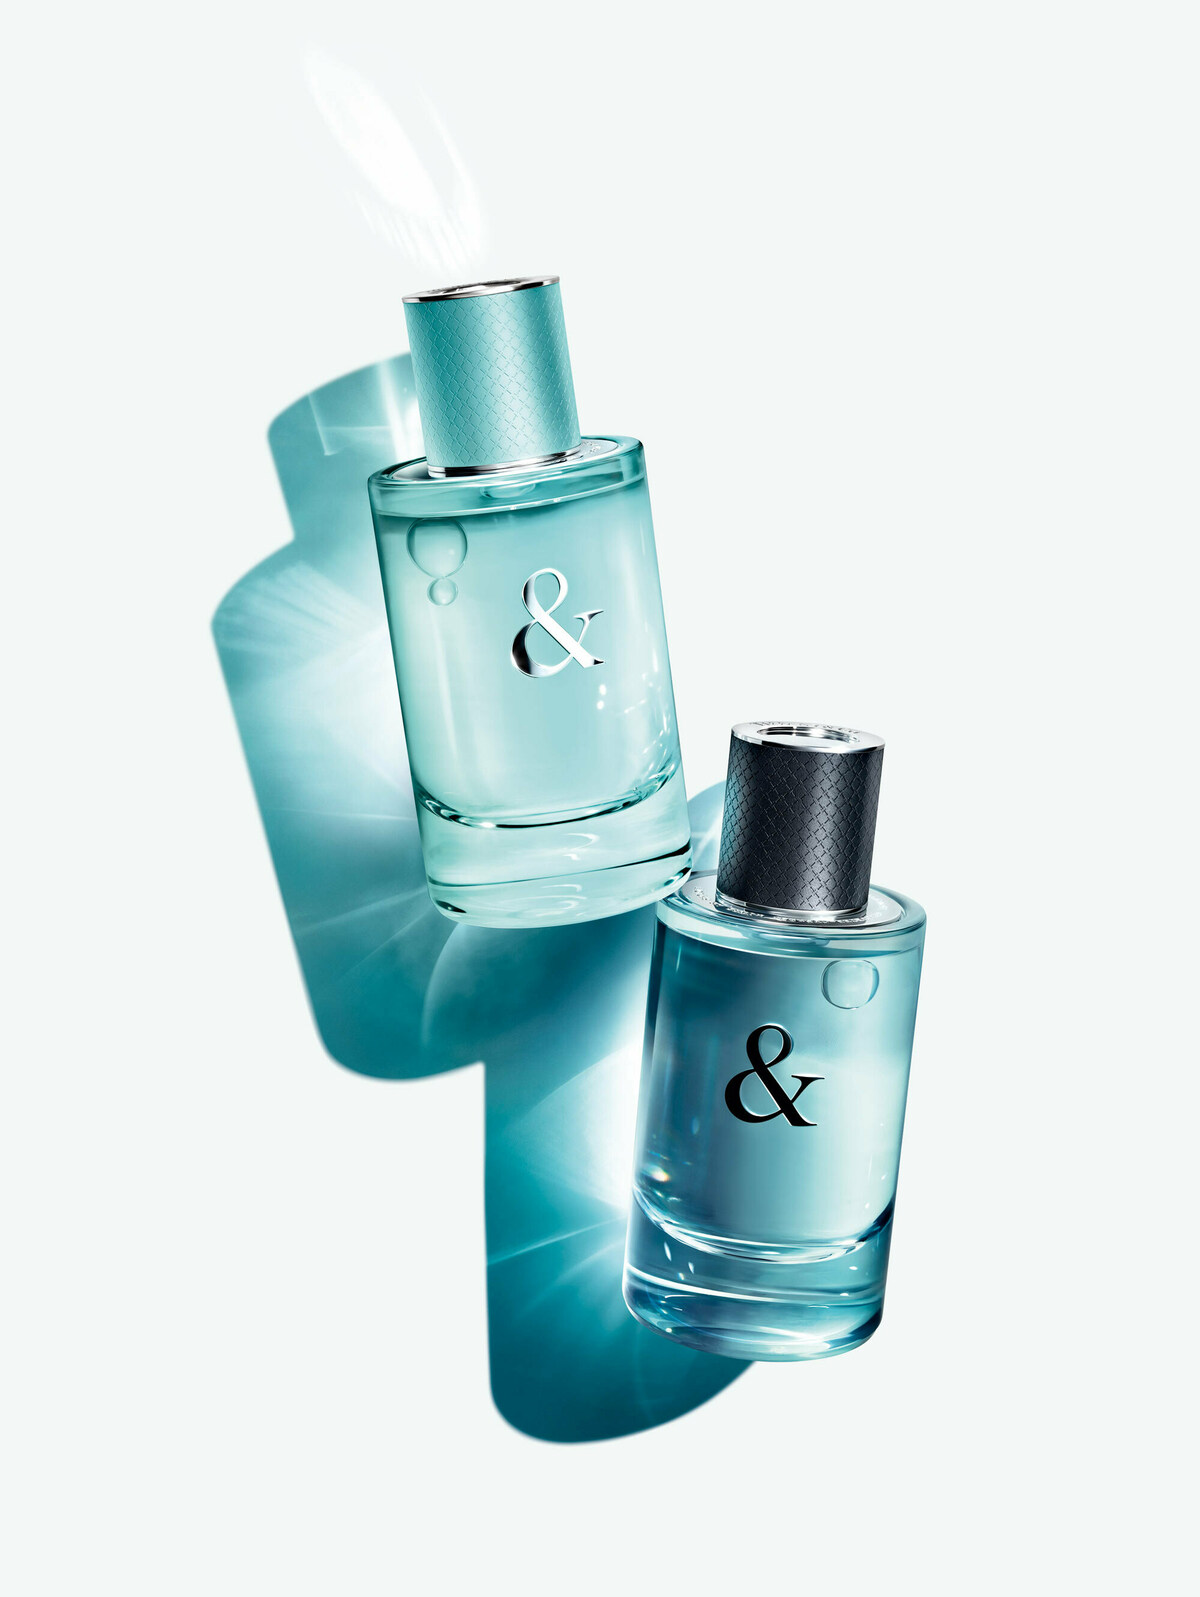 Tiffany & Love for Him by Tiffany & Co. » Reviews & Perfume Facts